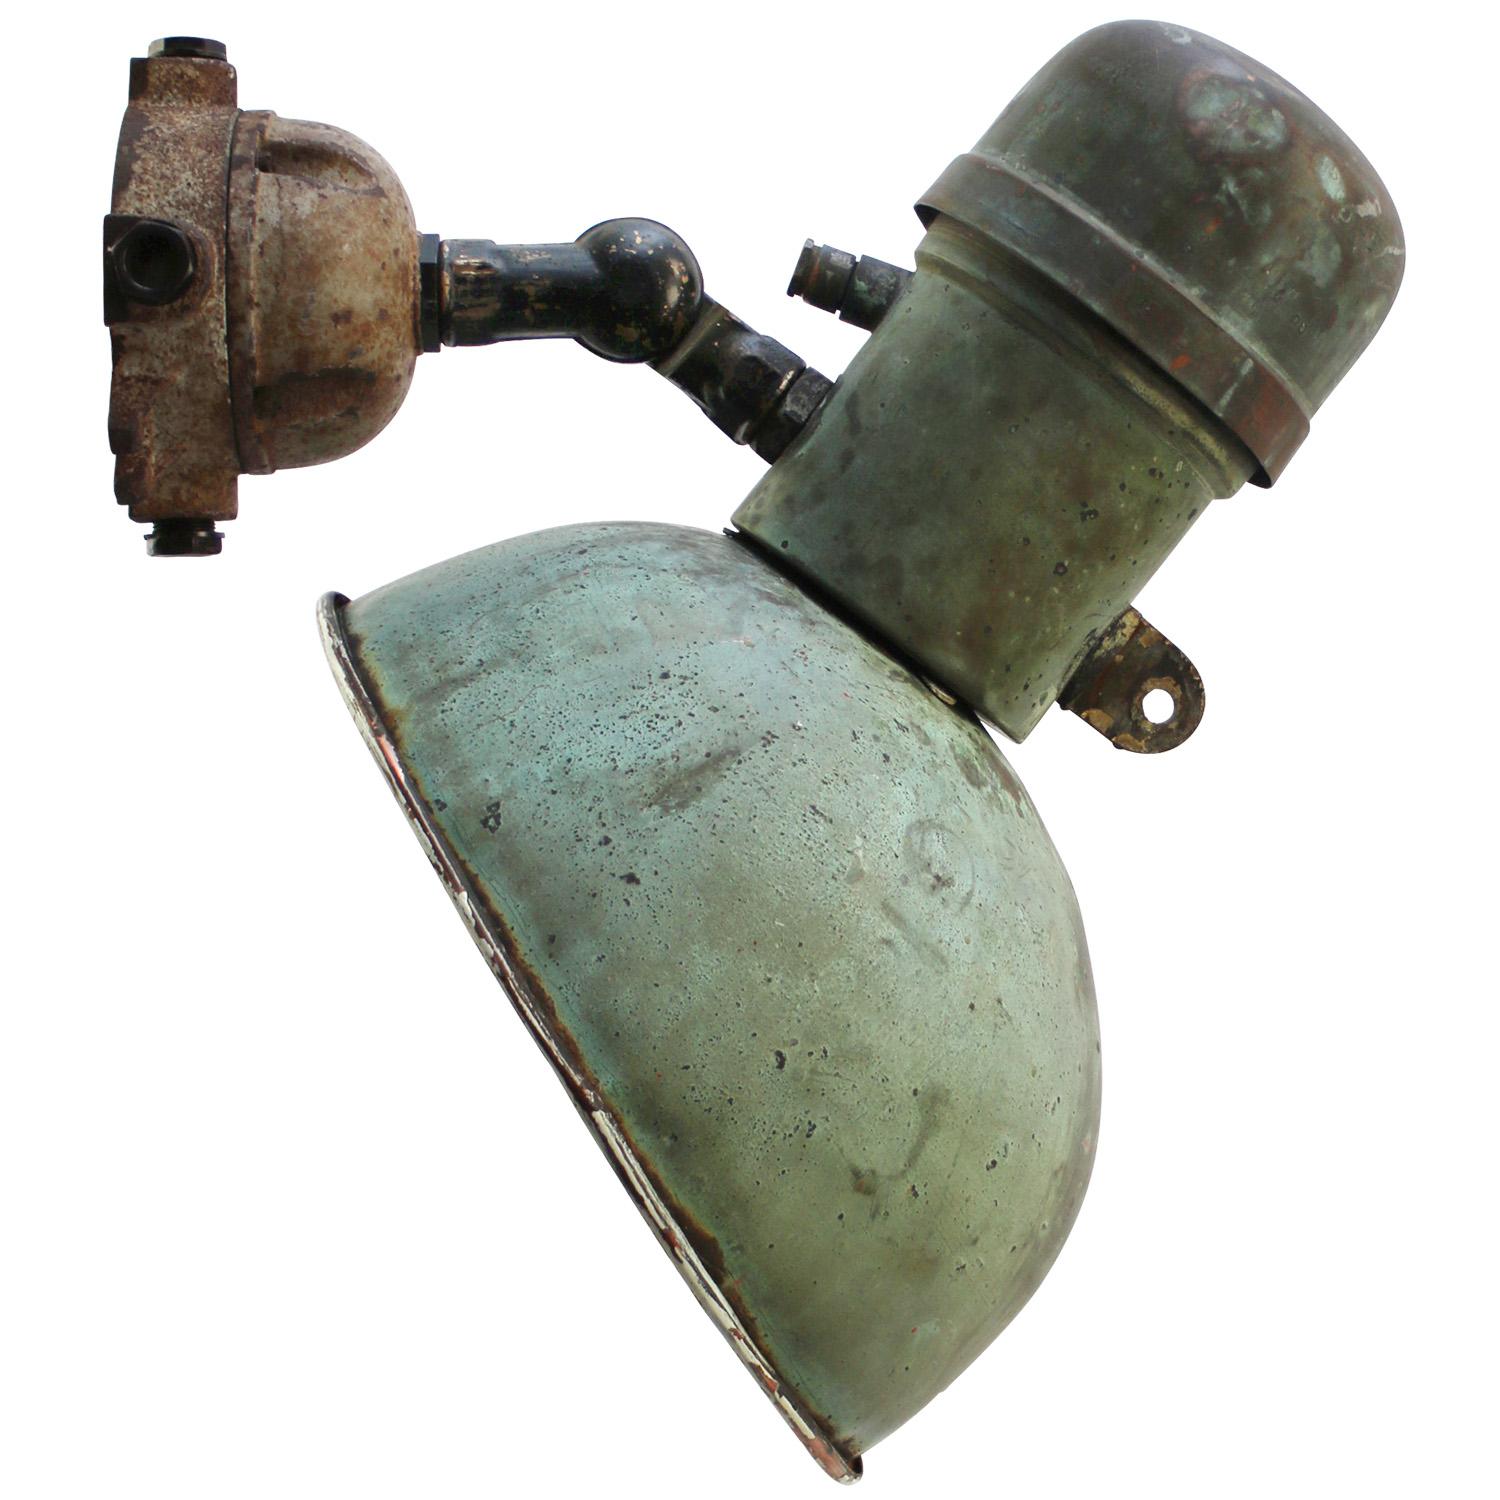 Large Vintage French copper street wall light
Green copper, cast iron base and brass arm

Diameter wall mount 18 cm

Weight: 6.90 kg / 15.2 lb

Priced per individual item. All lamps have been made suitable by international standards for